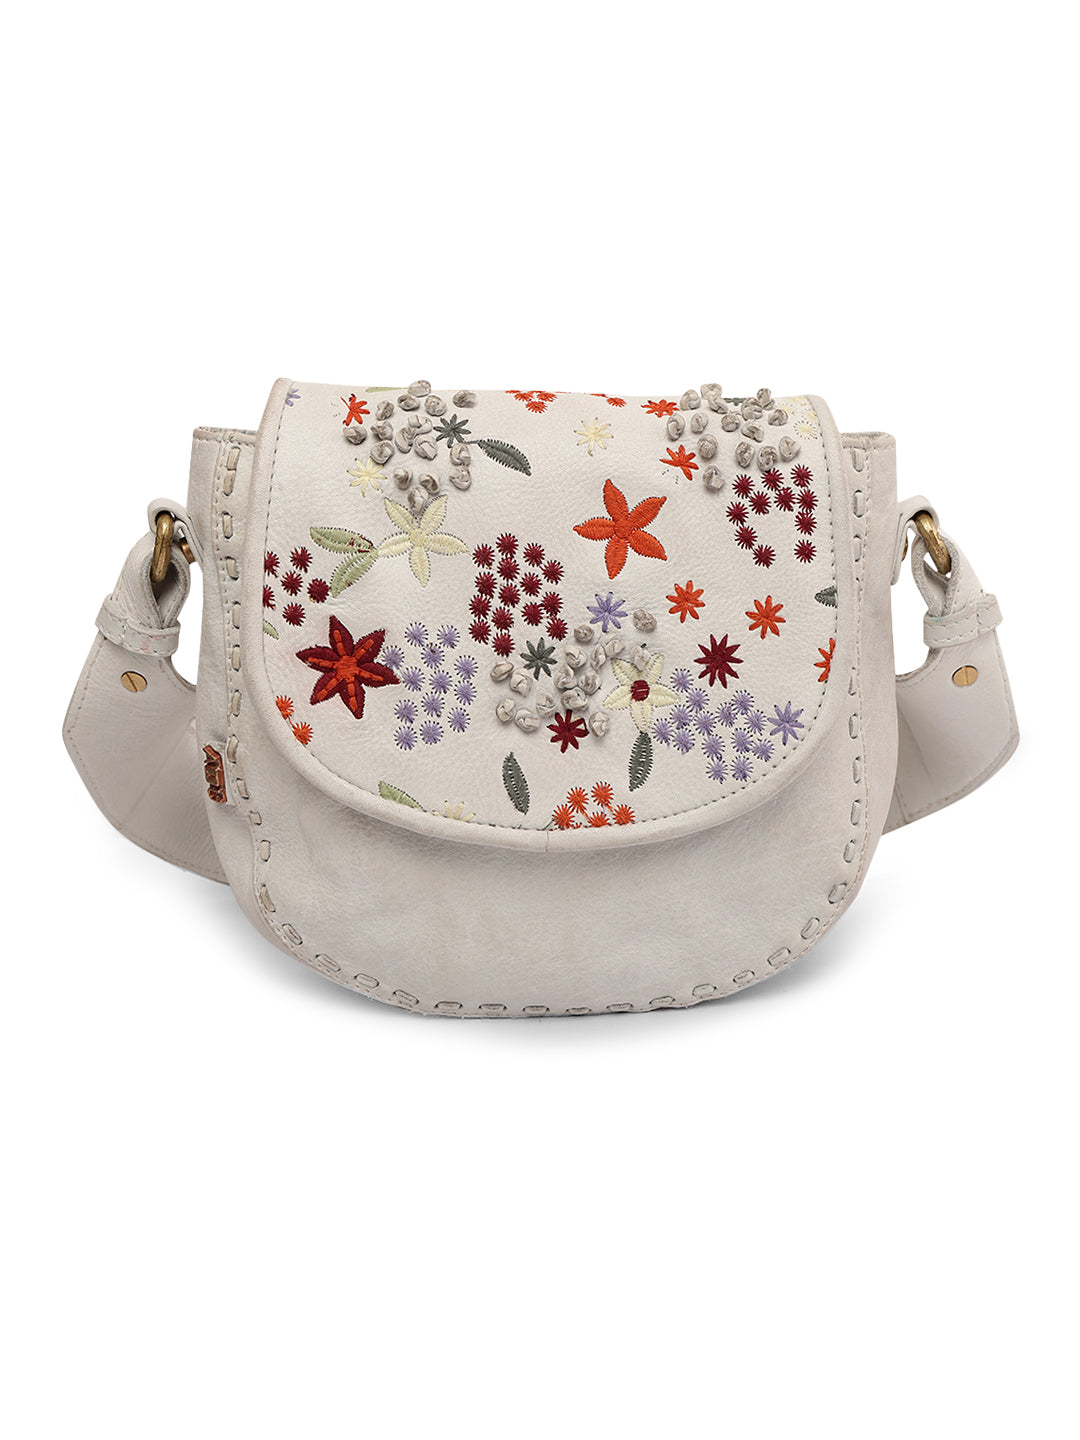 Floral Bliss: White Leather Crossbody bag with Colorful Flower Embroidery